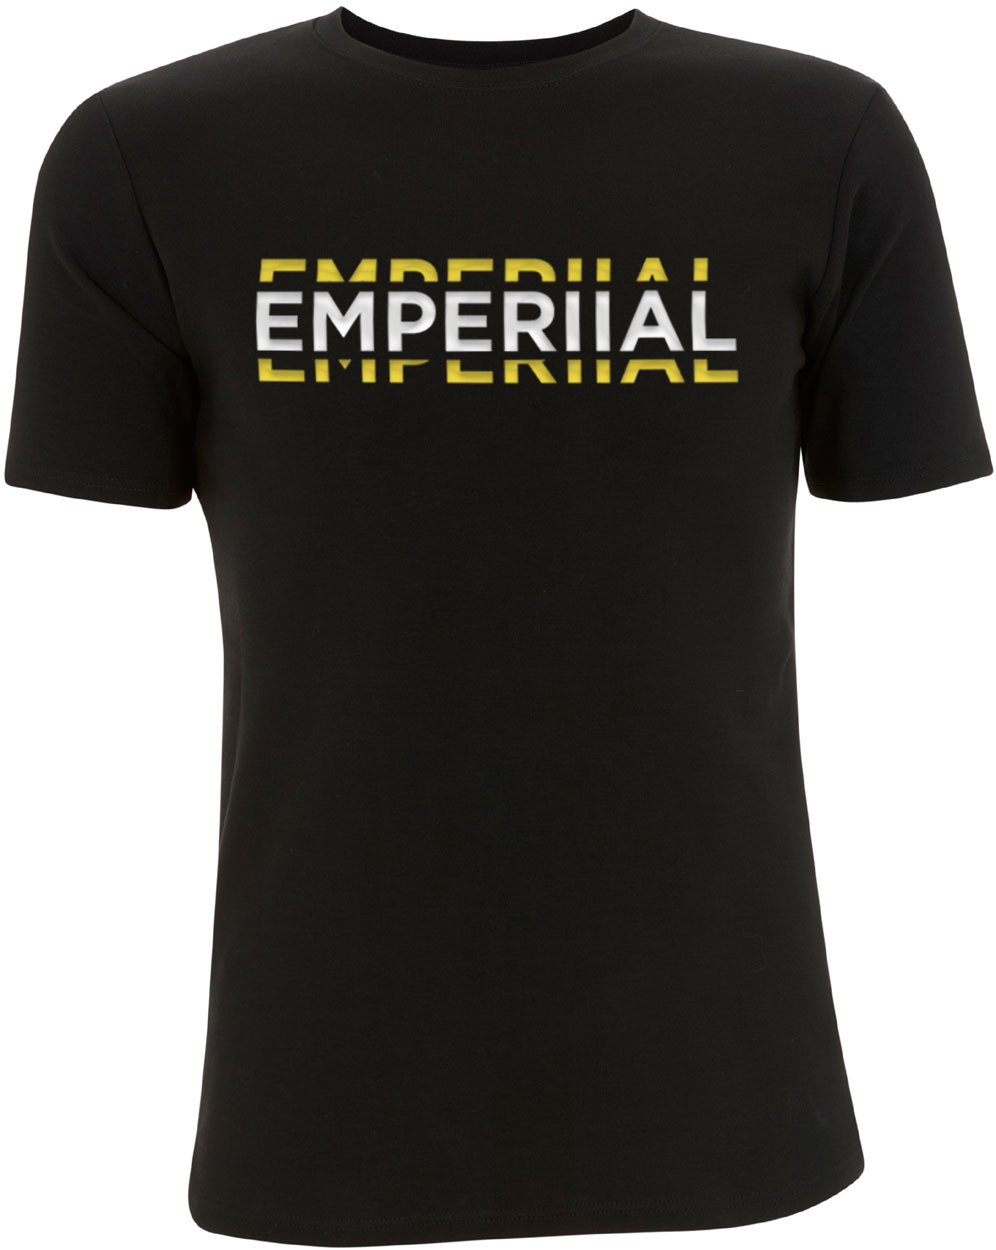 Emperiial - Uncaged - T-Shirt 